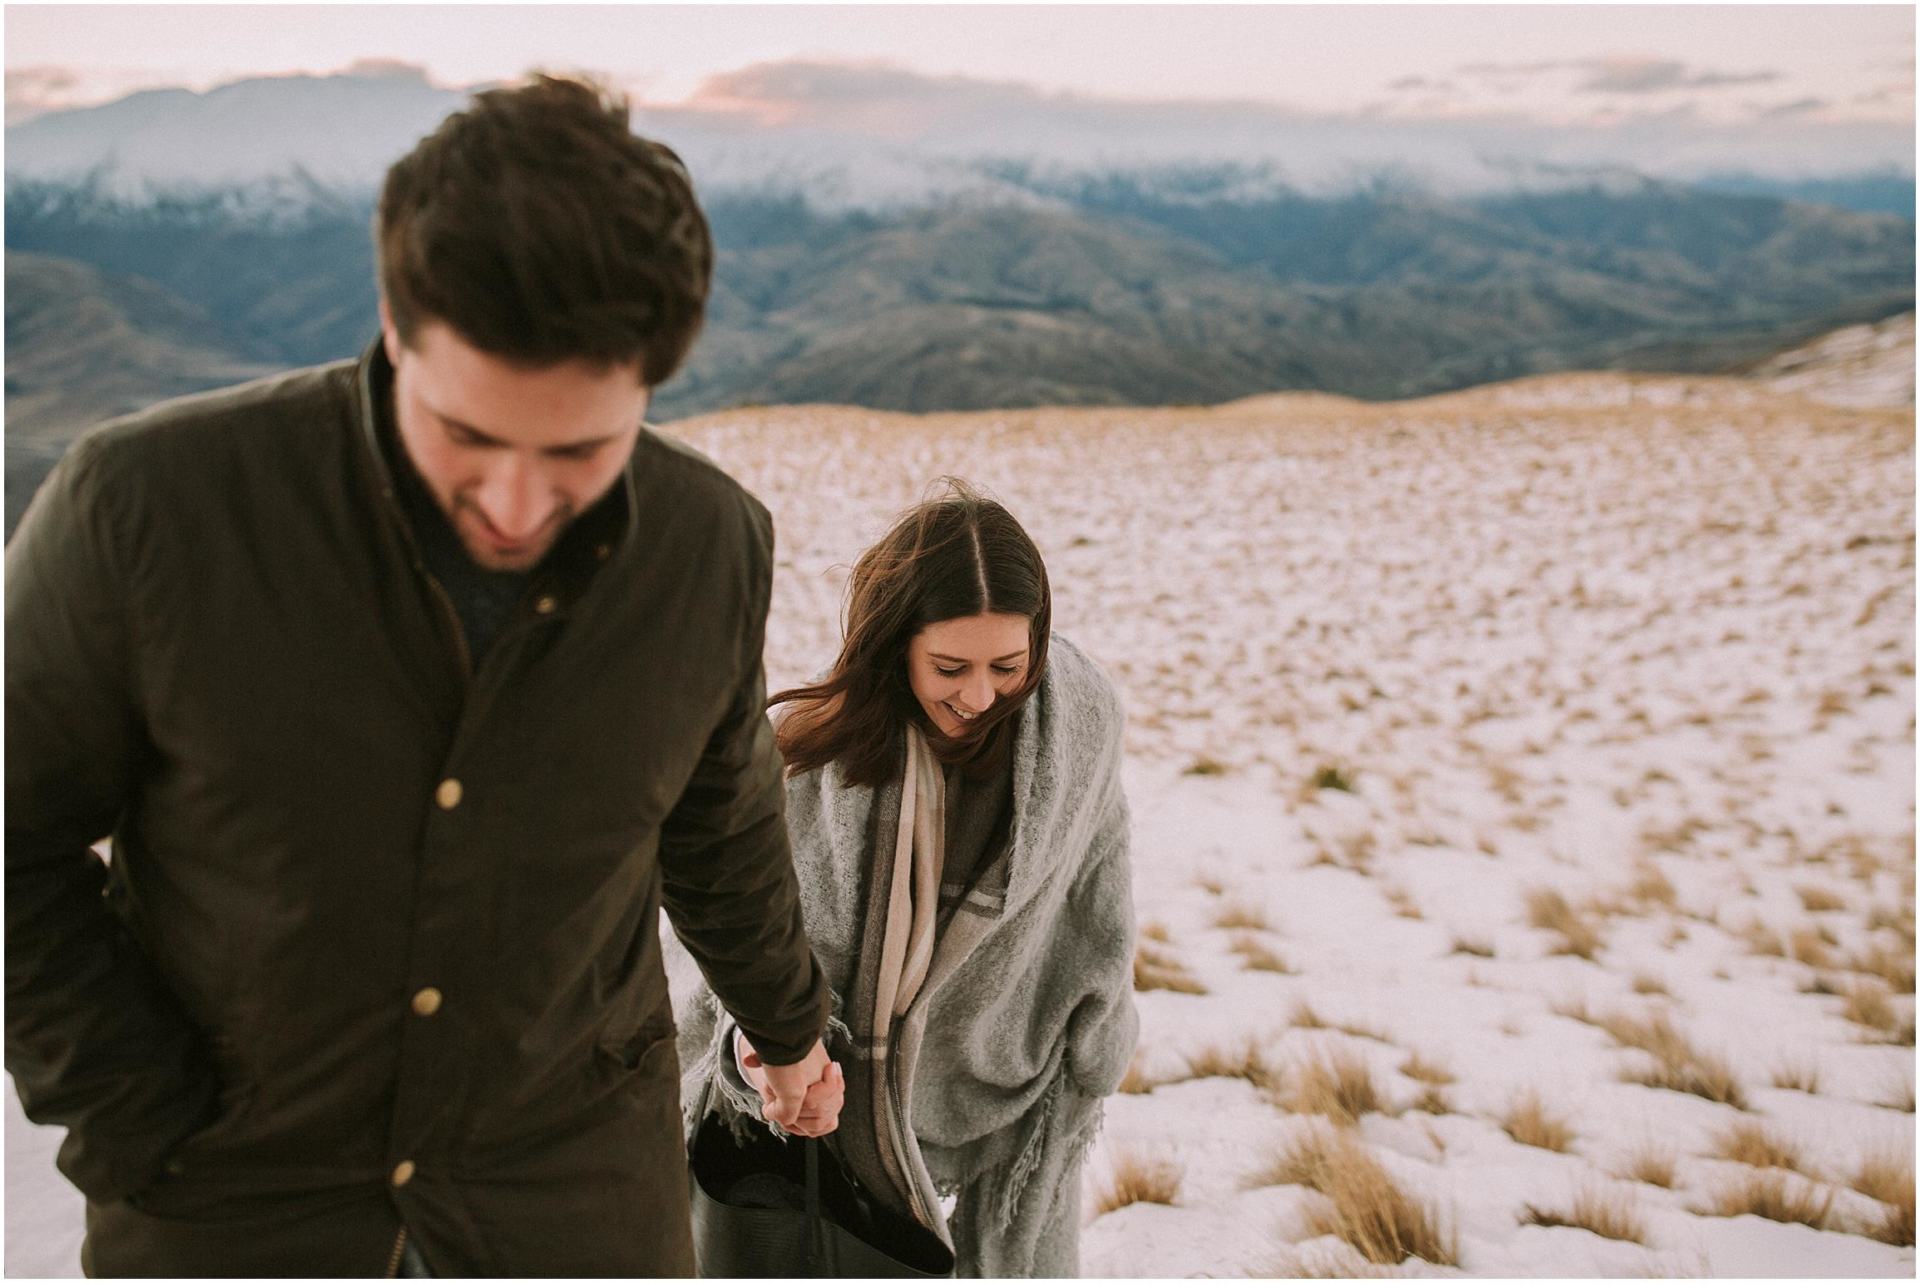 Charlotte Kiri Photography - Engagement Photography with a happy couple holding hands and smiling as they walk over snow-covered tussock grass, with mountains behind, in Wanaka, New Zealand